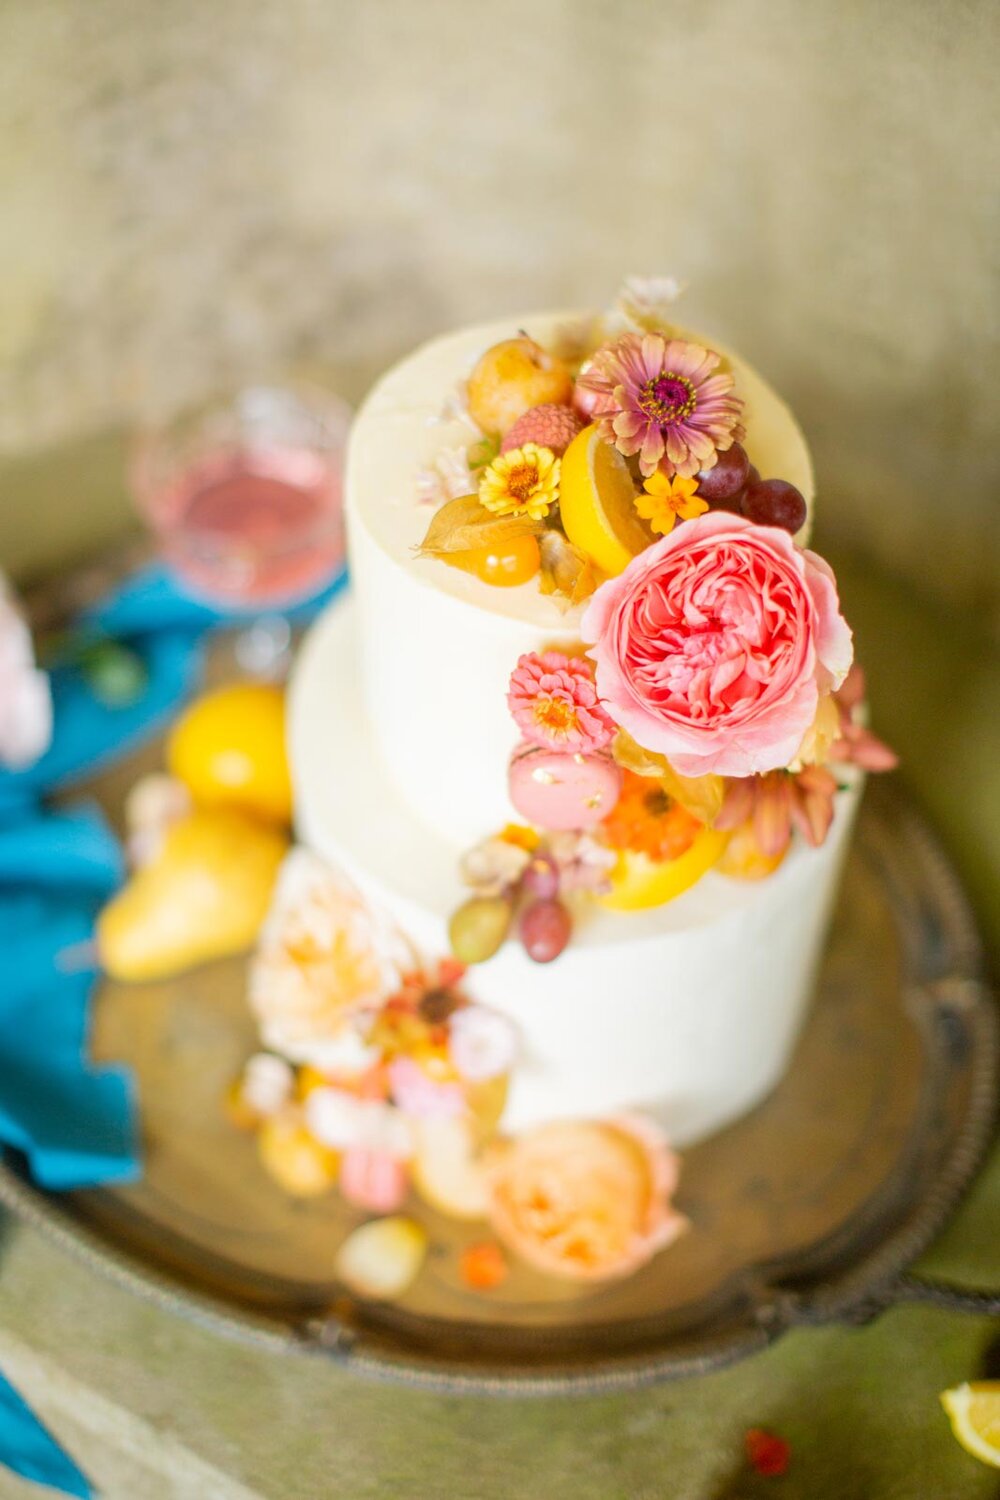 romantic-buttercream-cake-with-cascading-floral-decorations.jpg